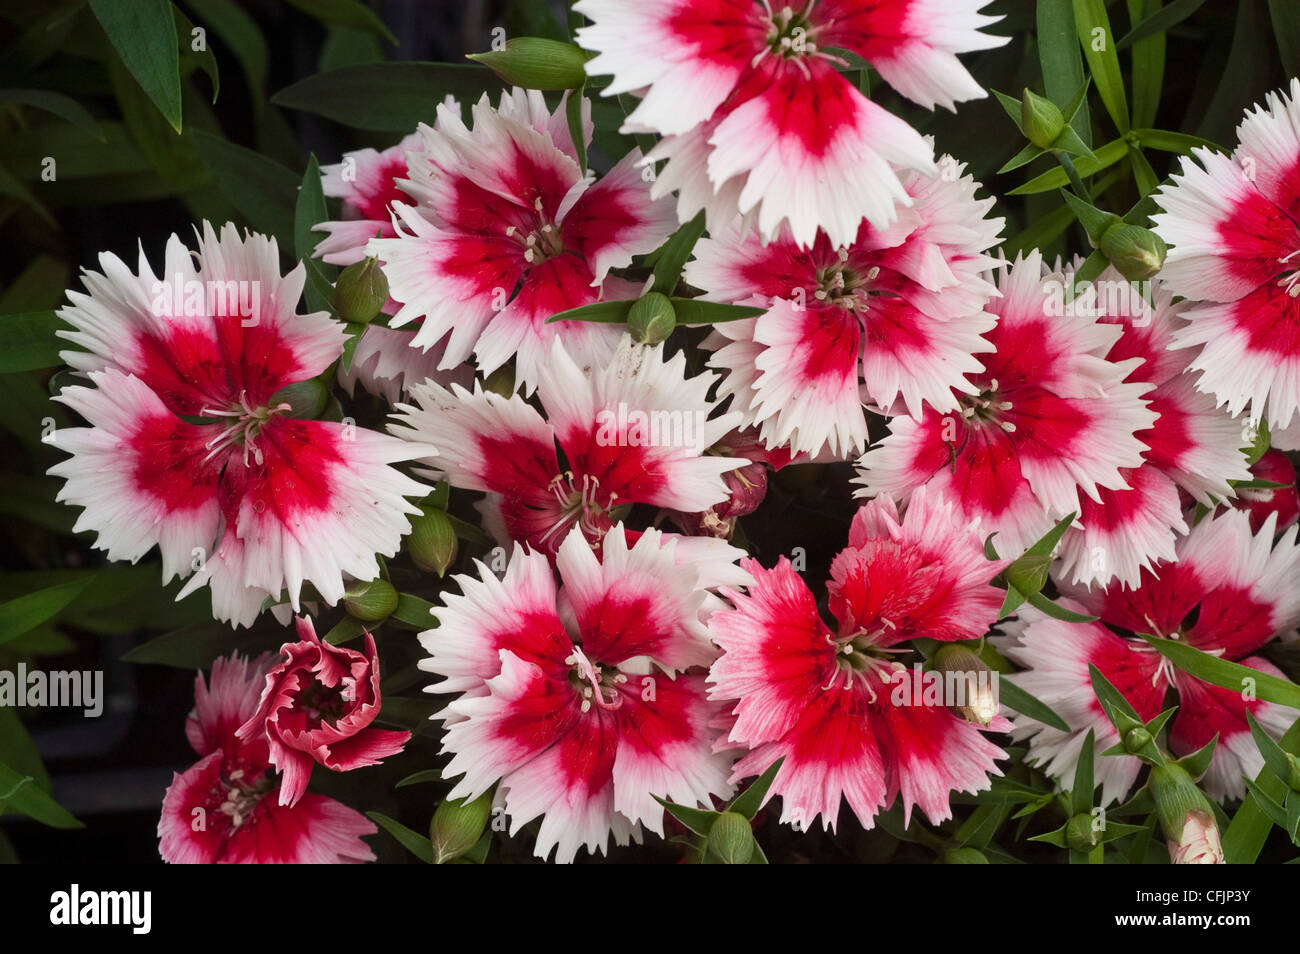 White and red flowers of Dianthus barbatus, Caryophyllaceae Stock Photo